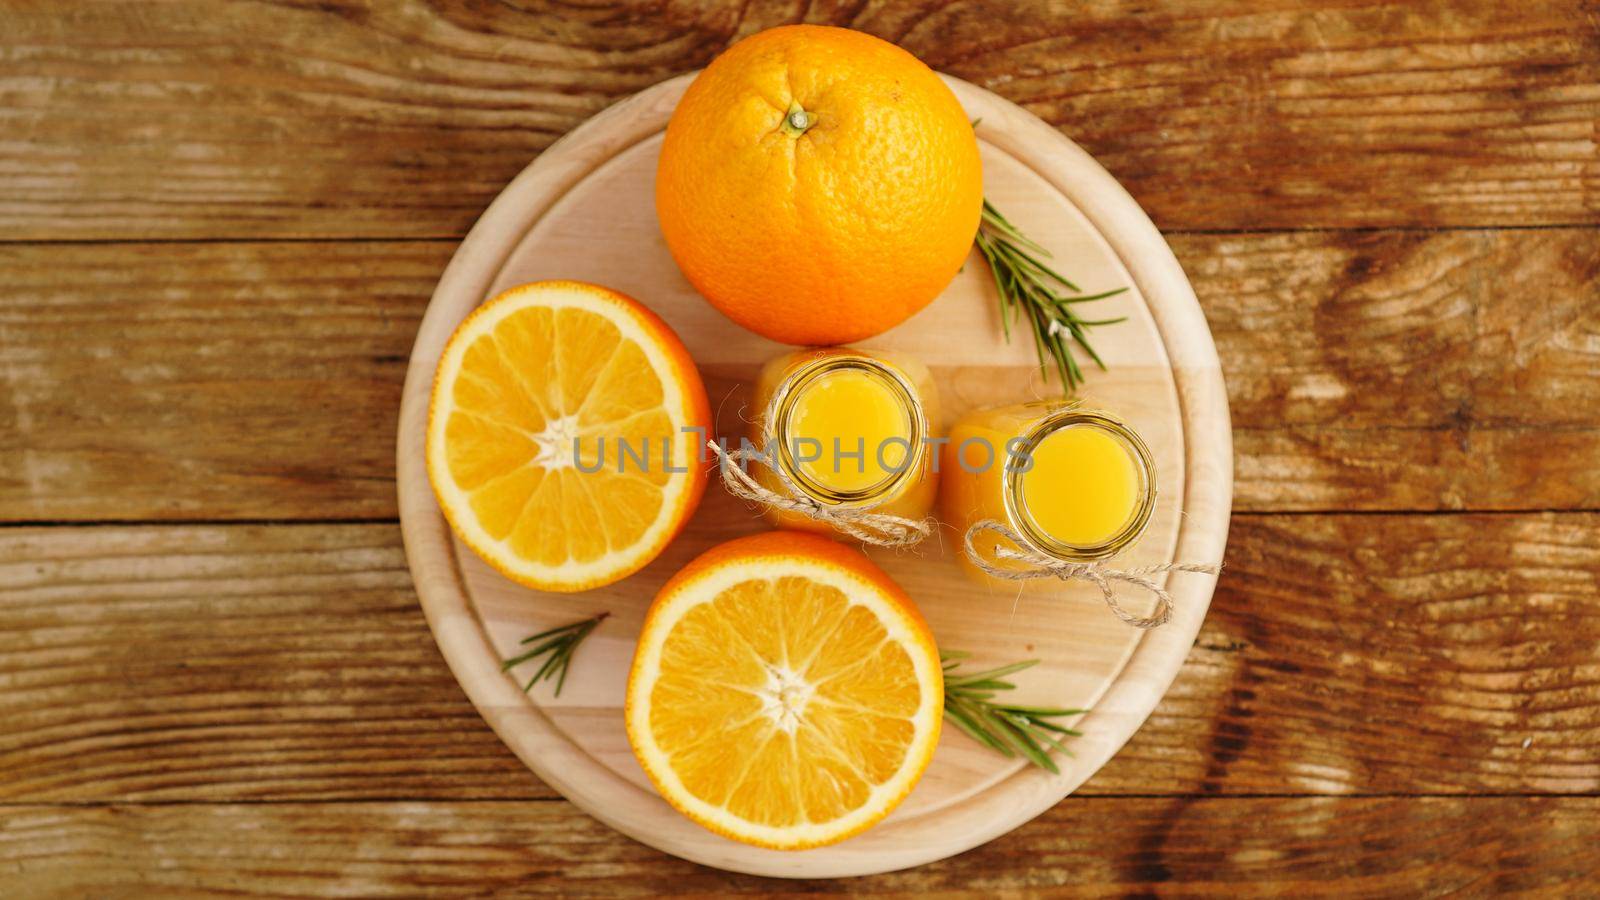 Fresh orange juice on wooden table on a wooden board. Sliced oranges and two bottles of juice. View from above. Rosemary sprigs for decoration